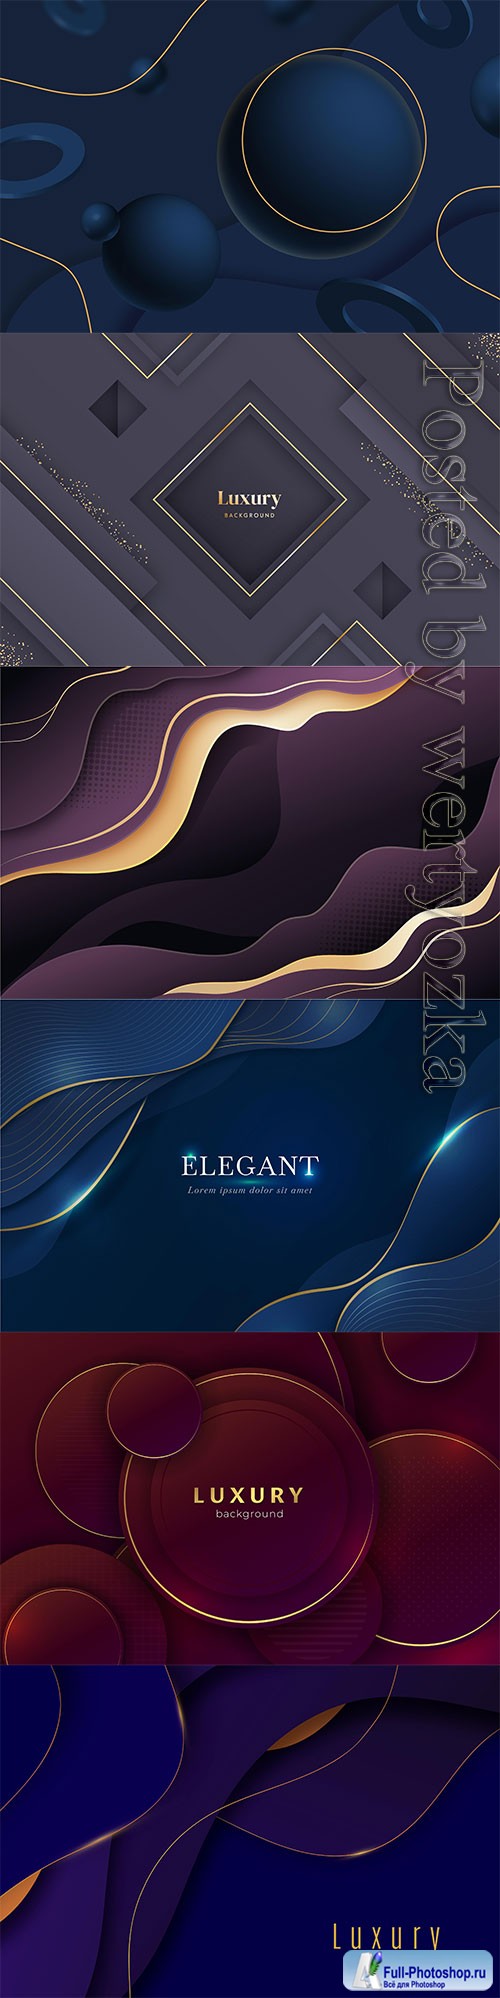 Luxury dark backgrounds with various abstract elements